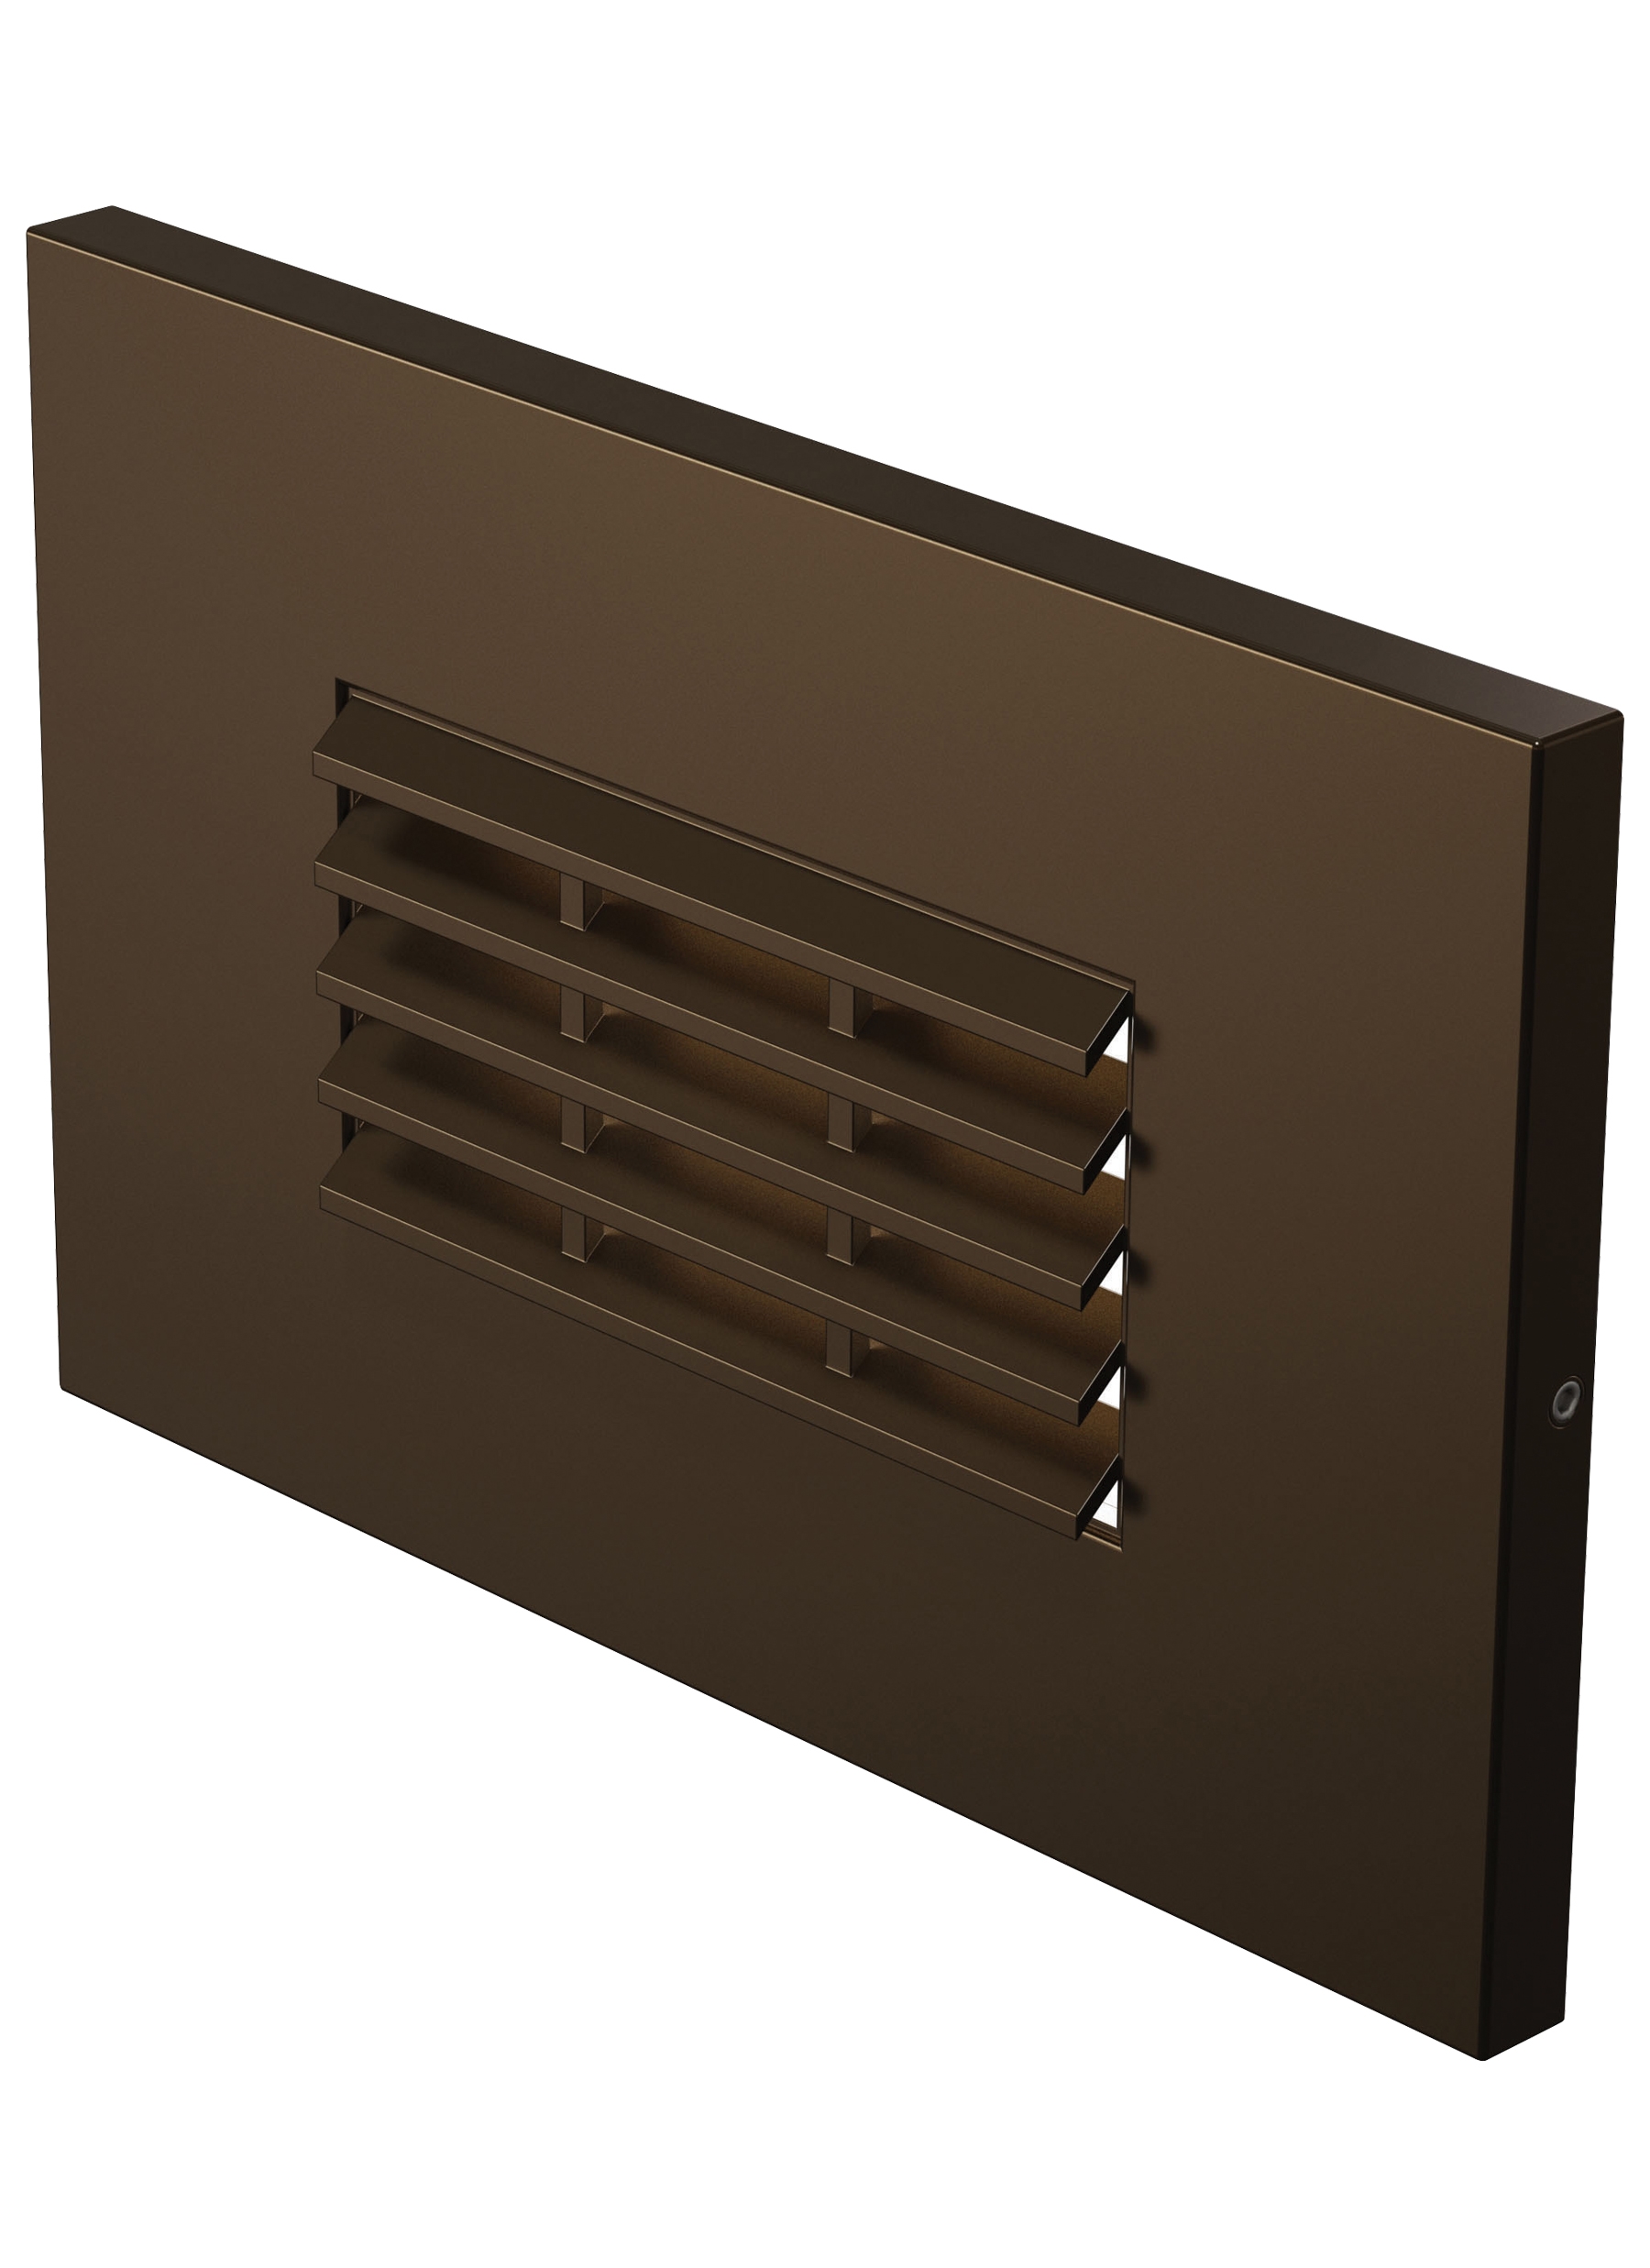 LBL Lighting's new LED Step Lights include this new horizontal Tarpa design